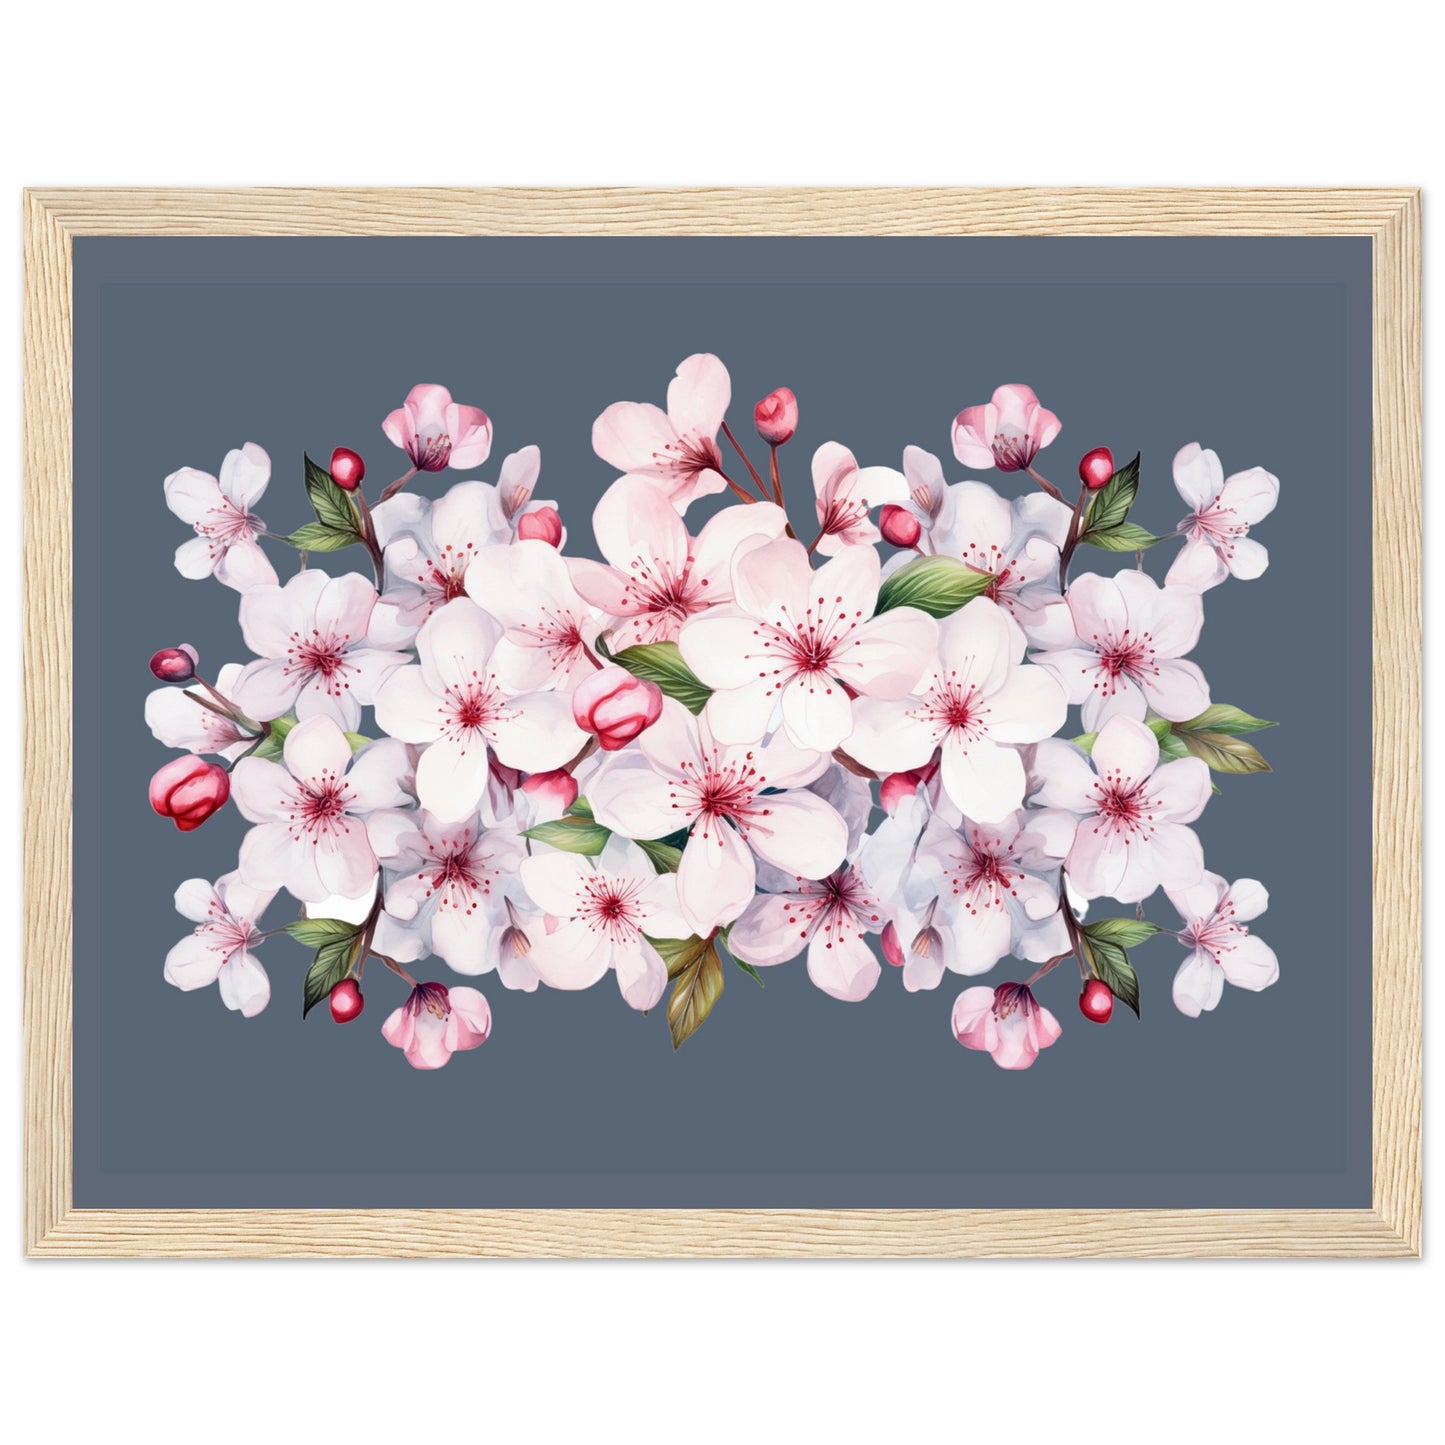 CHERRY BLOSSOMS No. 2 in BLUE Background - Premium Matte Paper Wooden Framed Poster